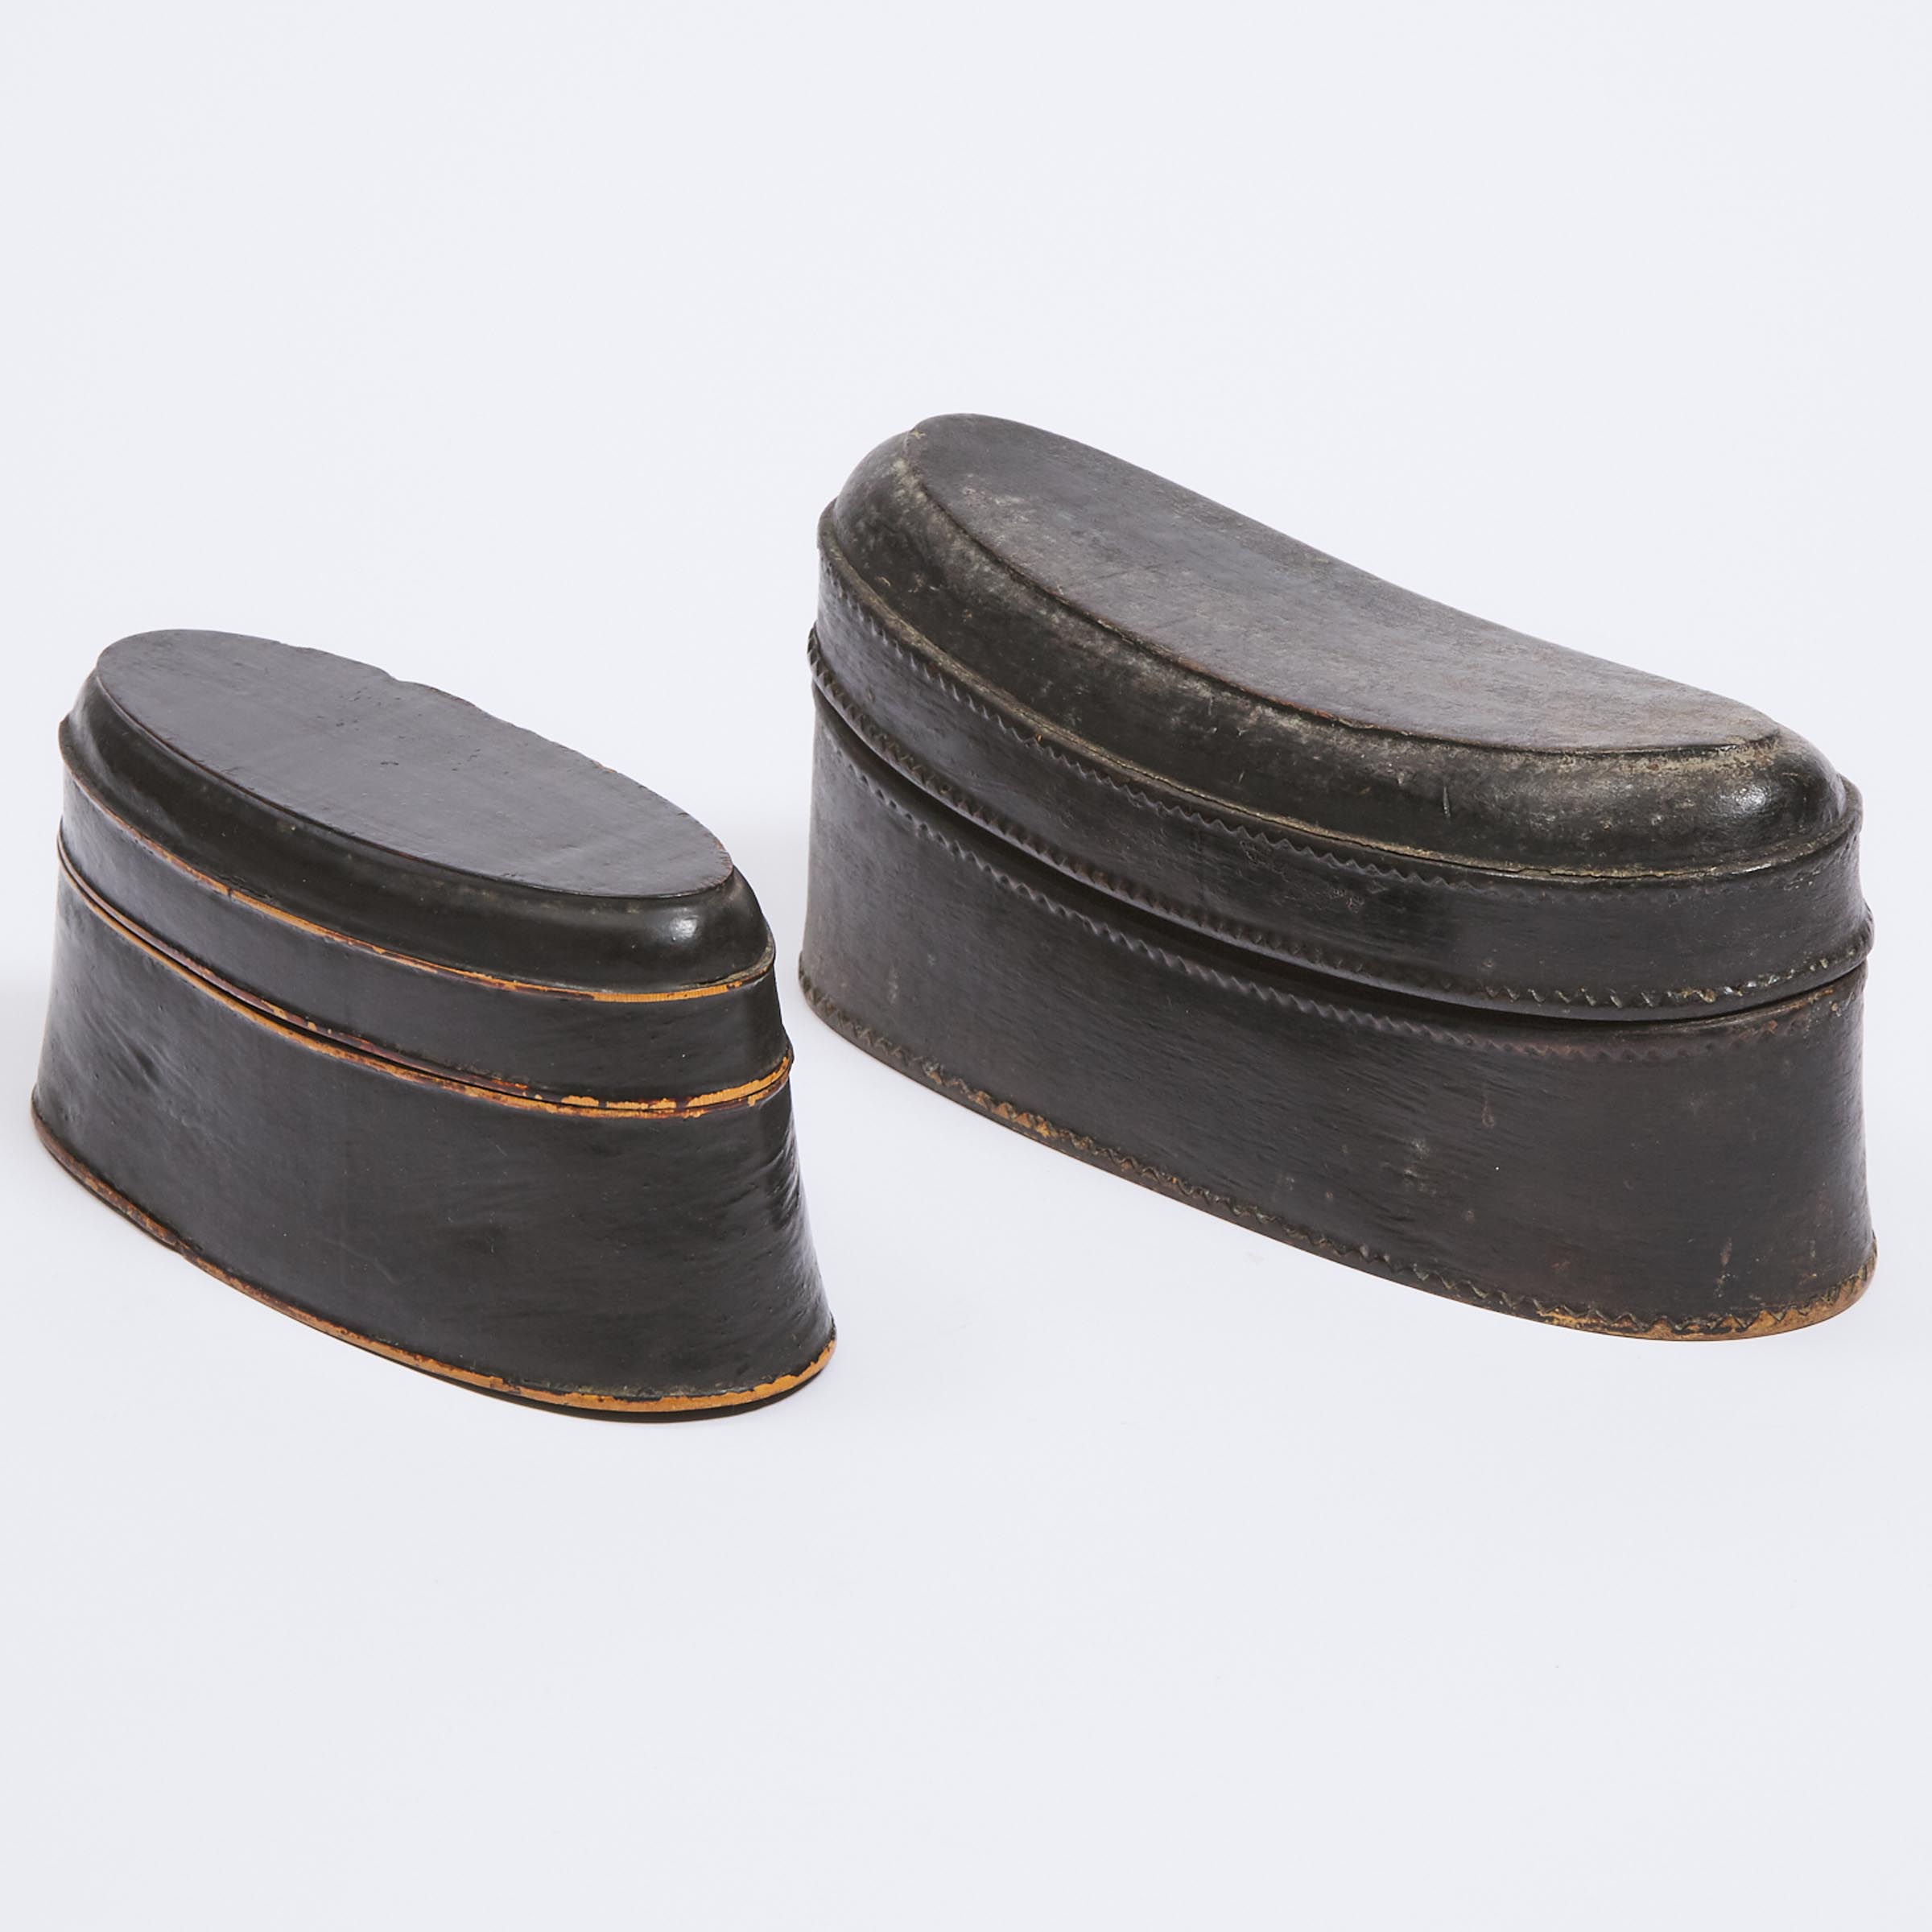 Two Gentleman's Accessory Boxes, 18th/early 19th century